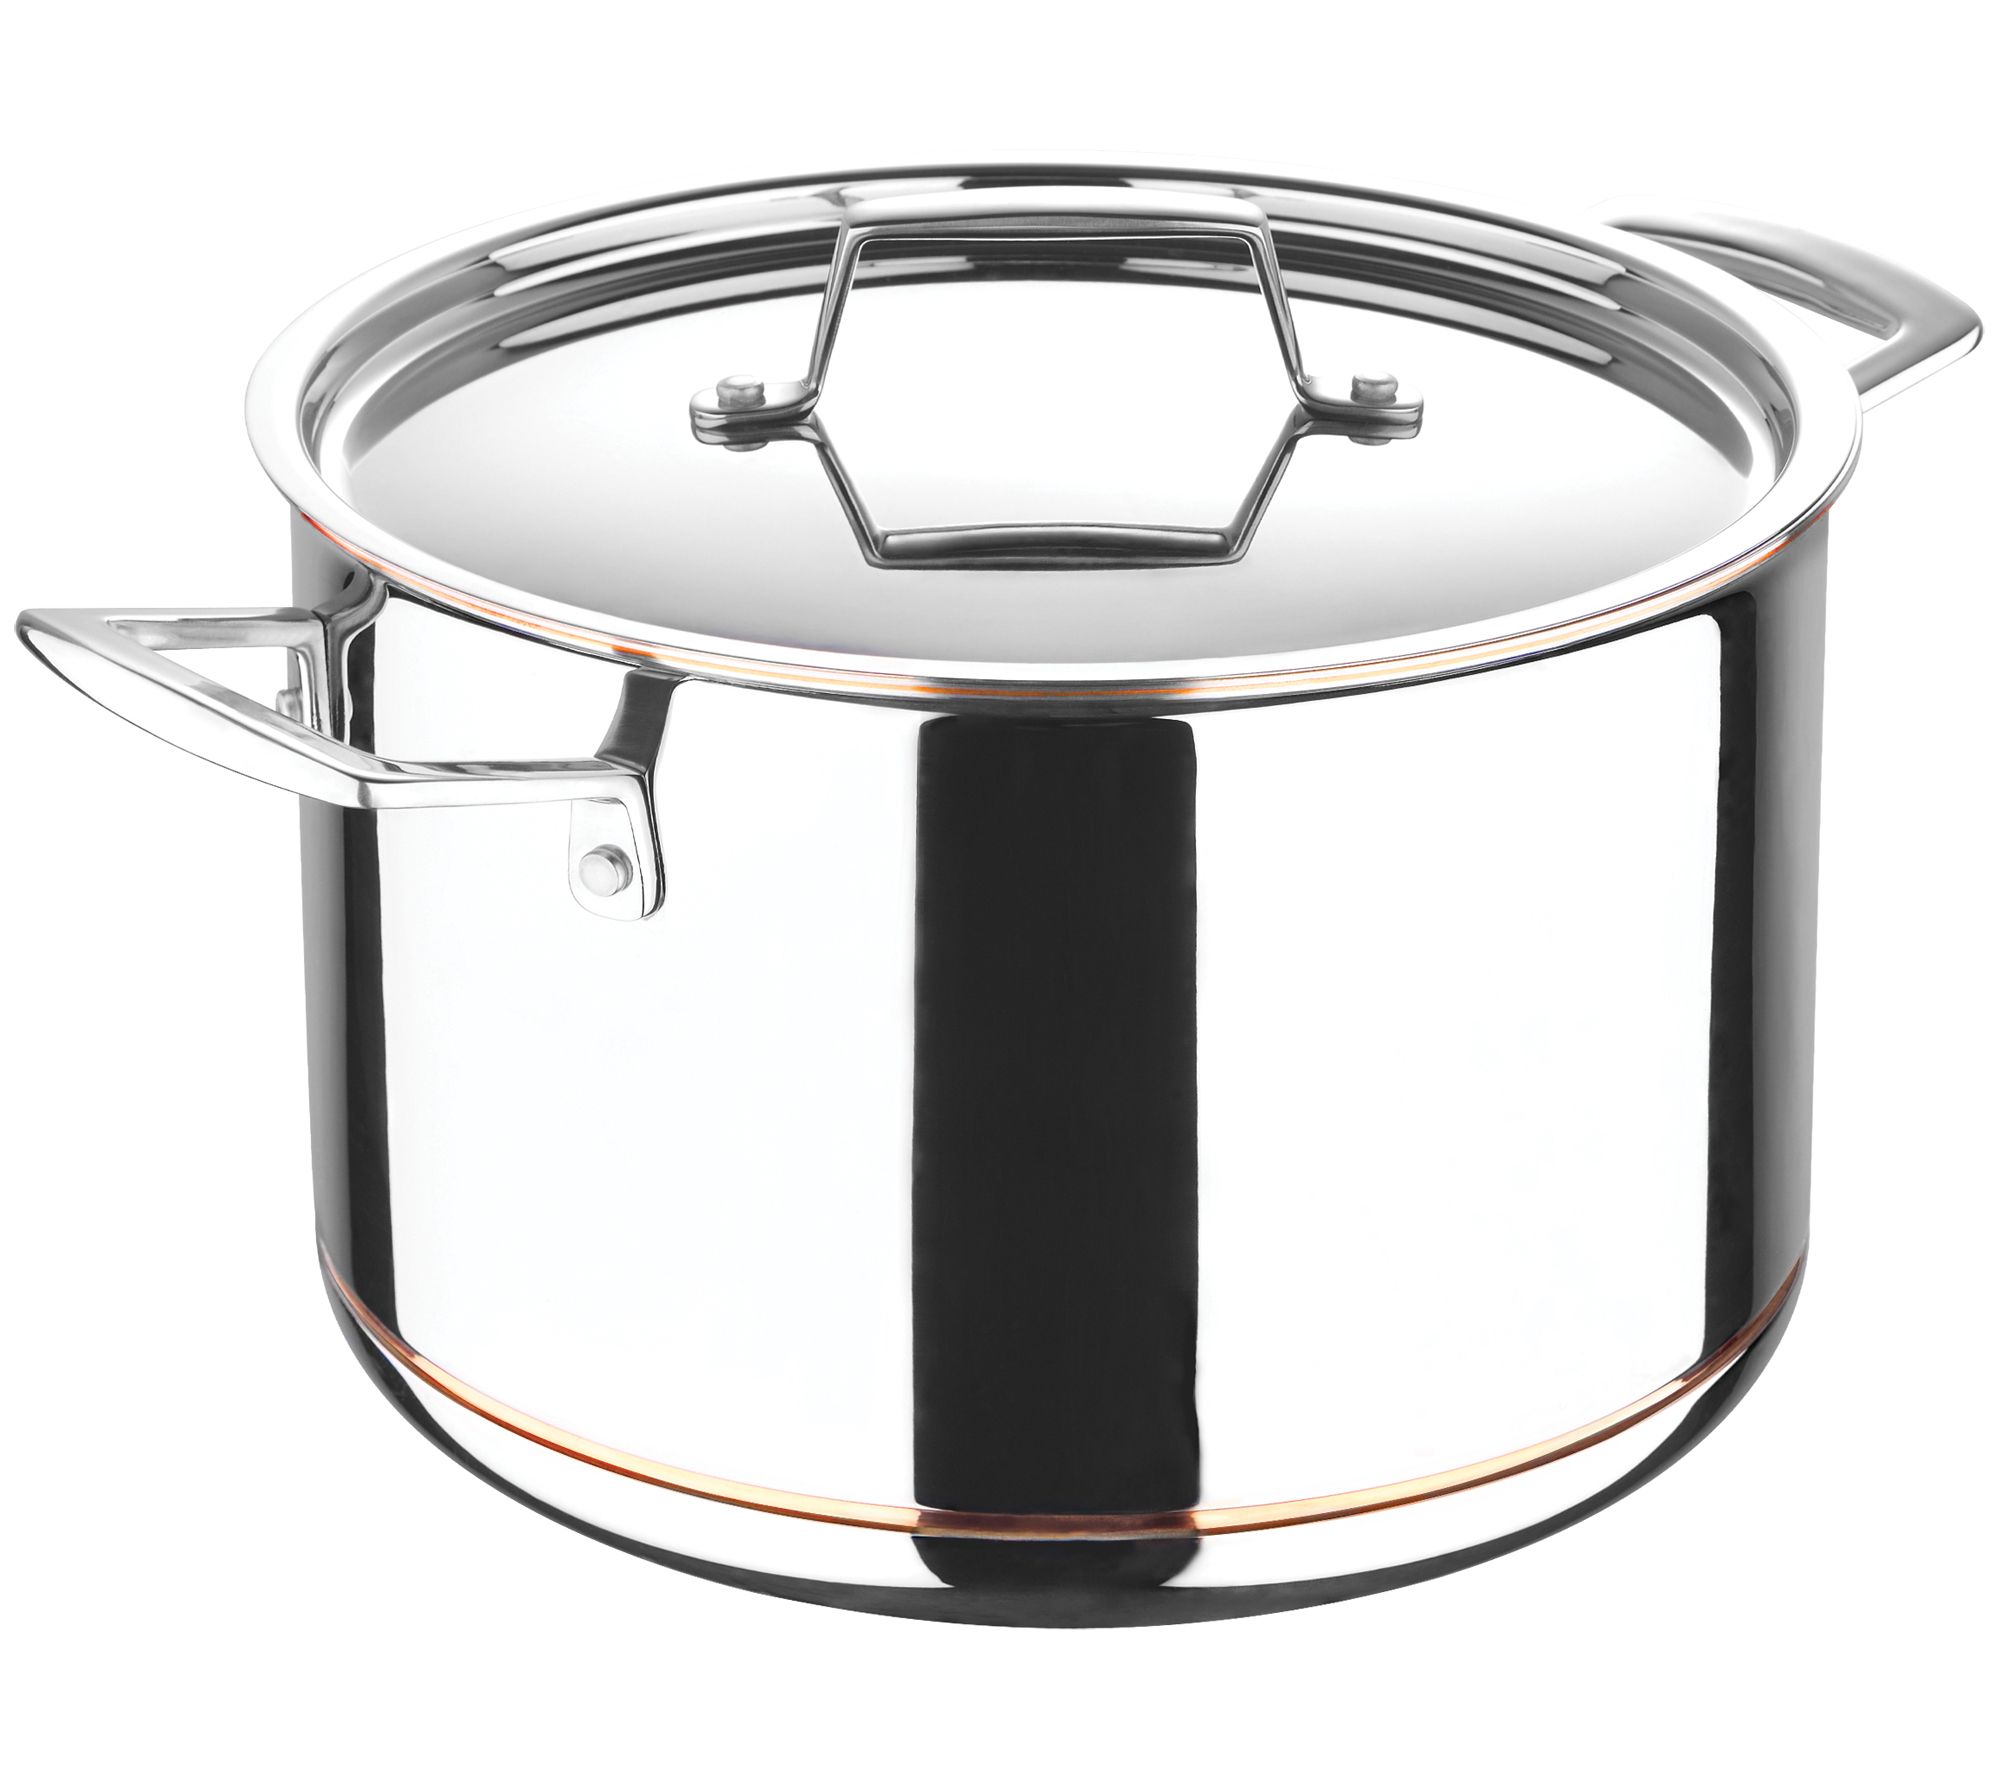  All-Clad Copper Core 5-Ply Stainless Steel Stockpot 8 Quart  Induction Oven Broiler Safe 600F Pots and Pans, Cookware Silver: Home &  Kitchen